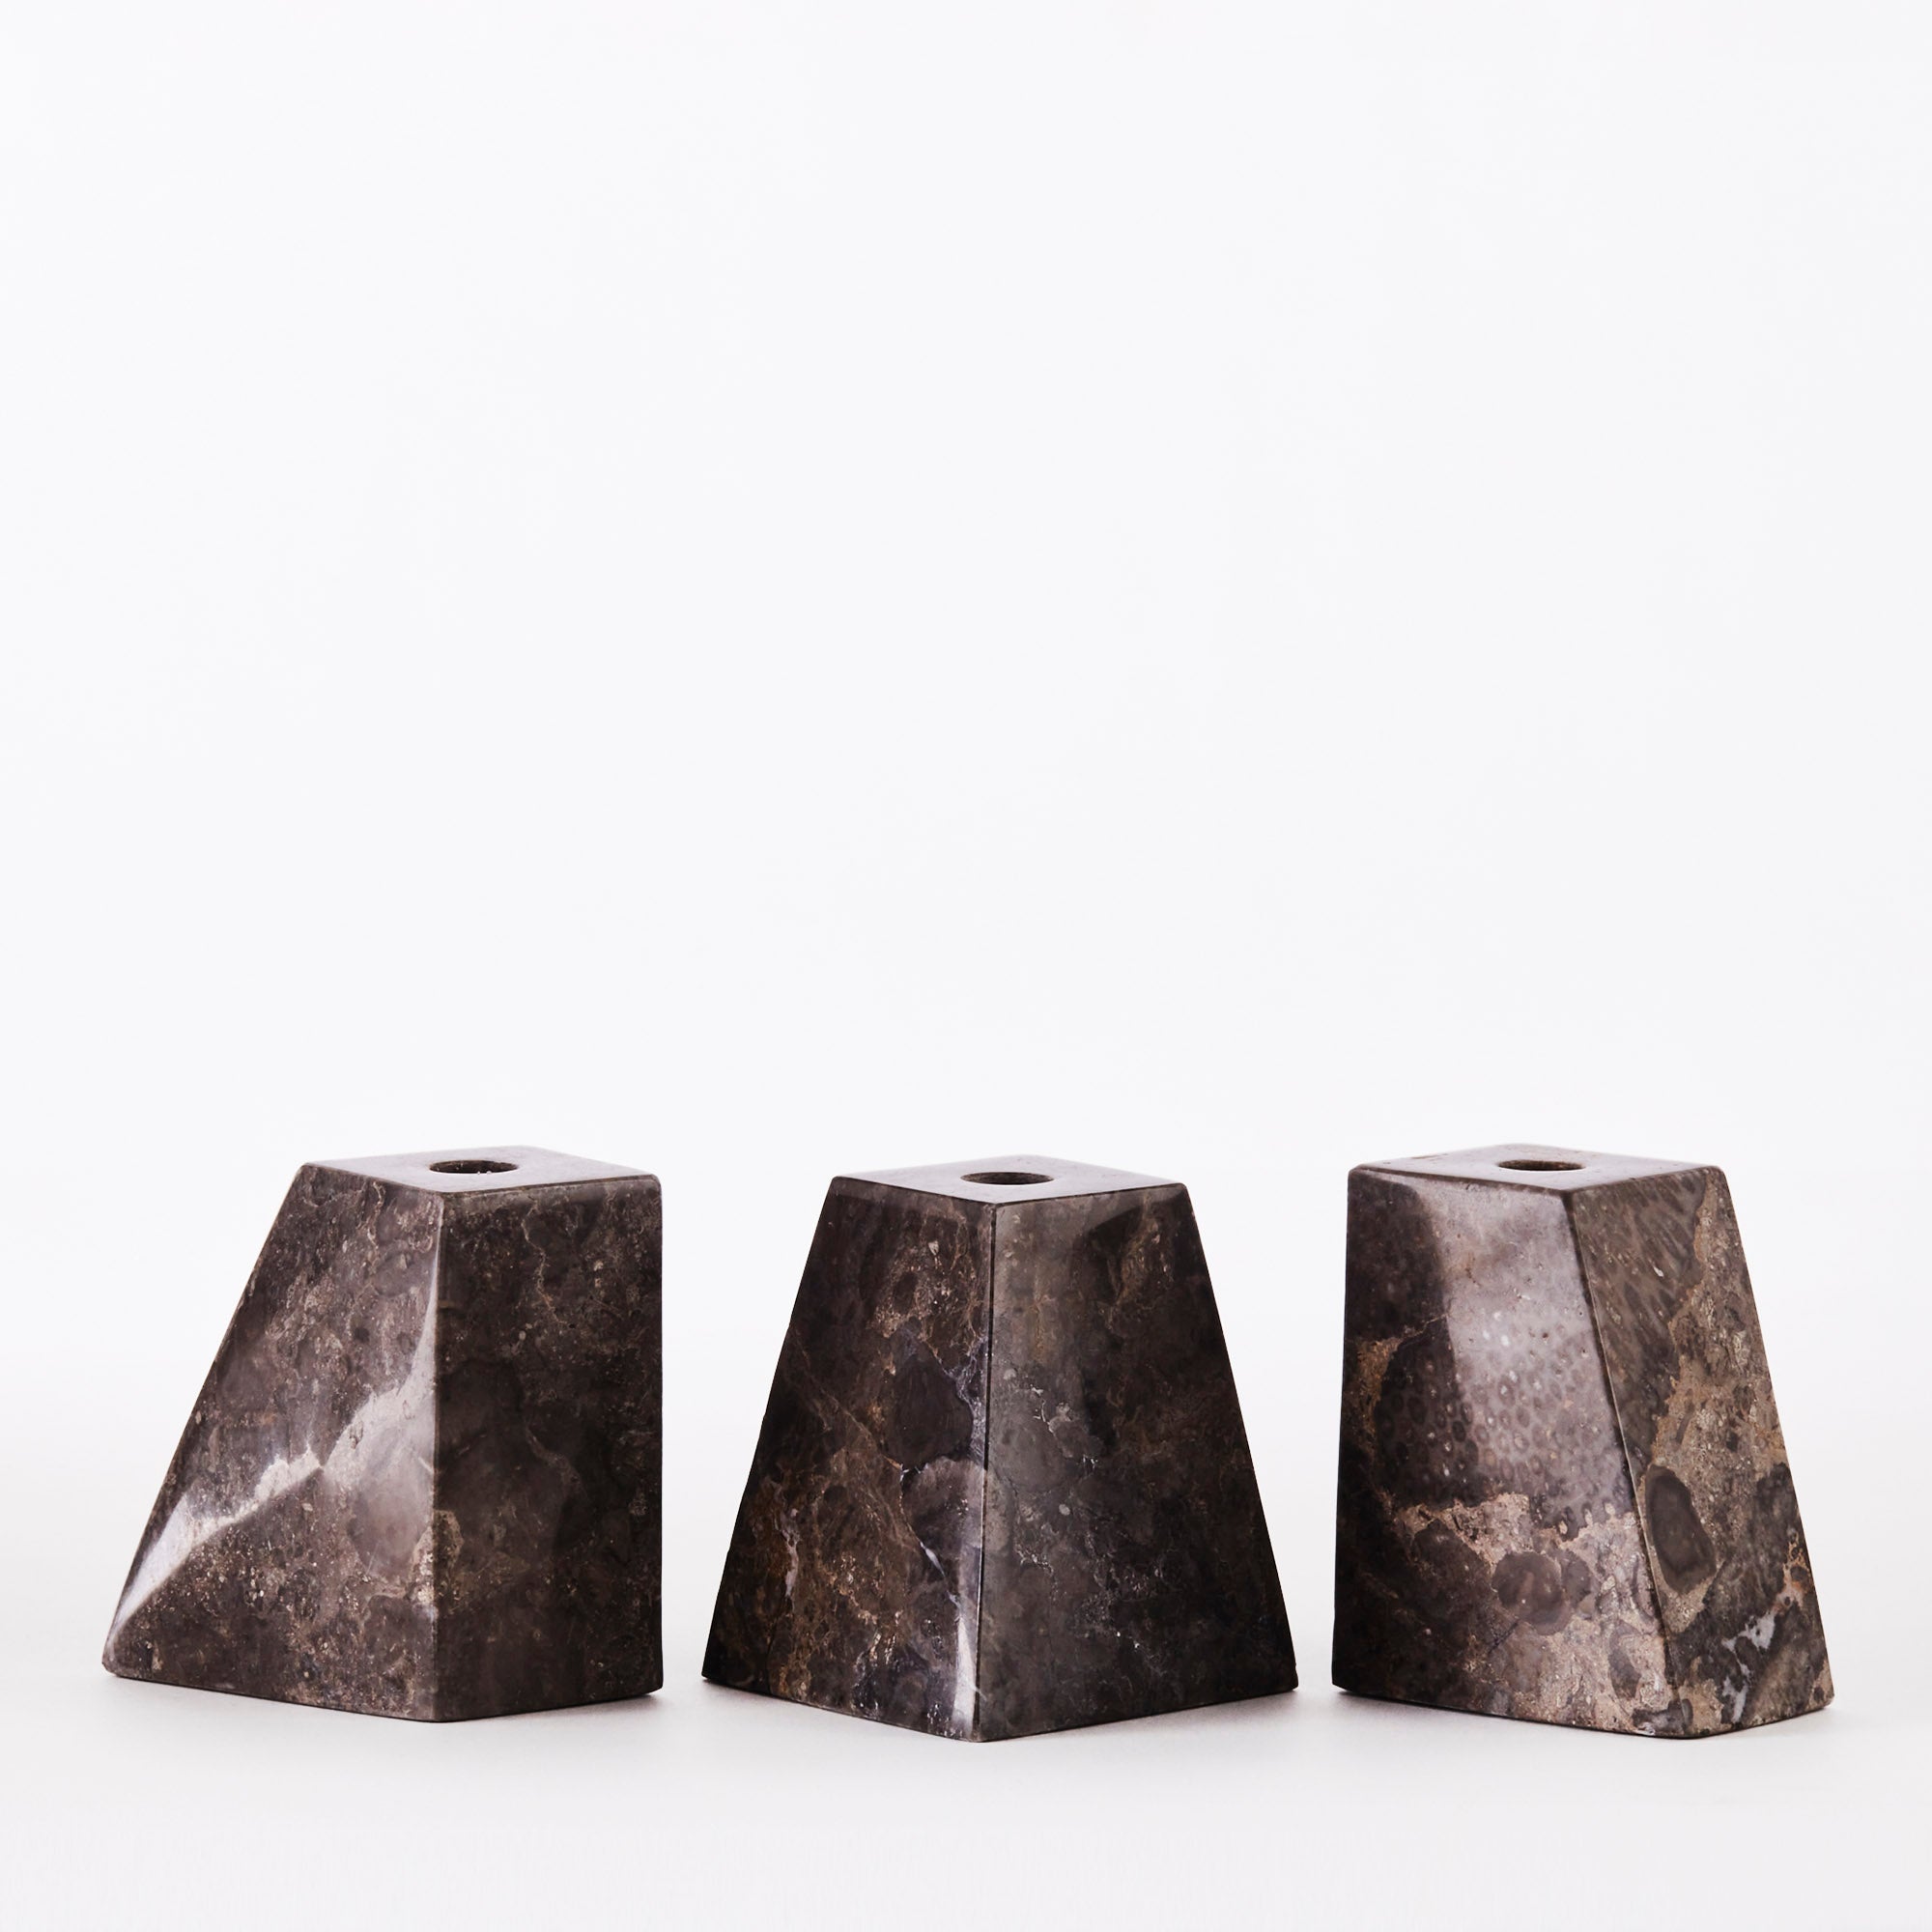 Pyramid Candle Holders Grey